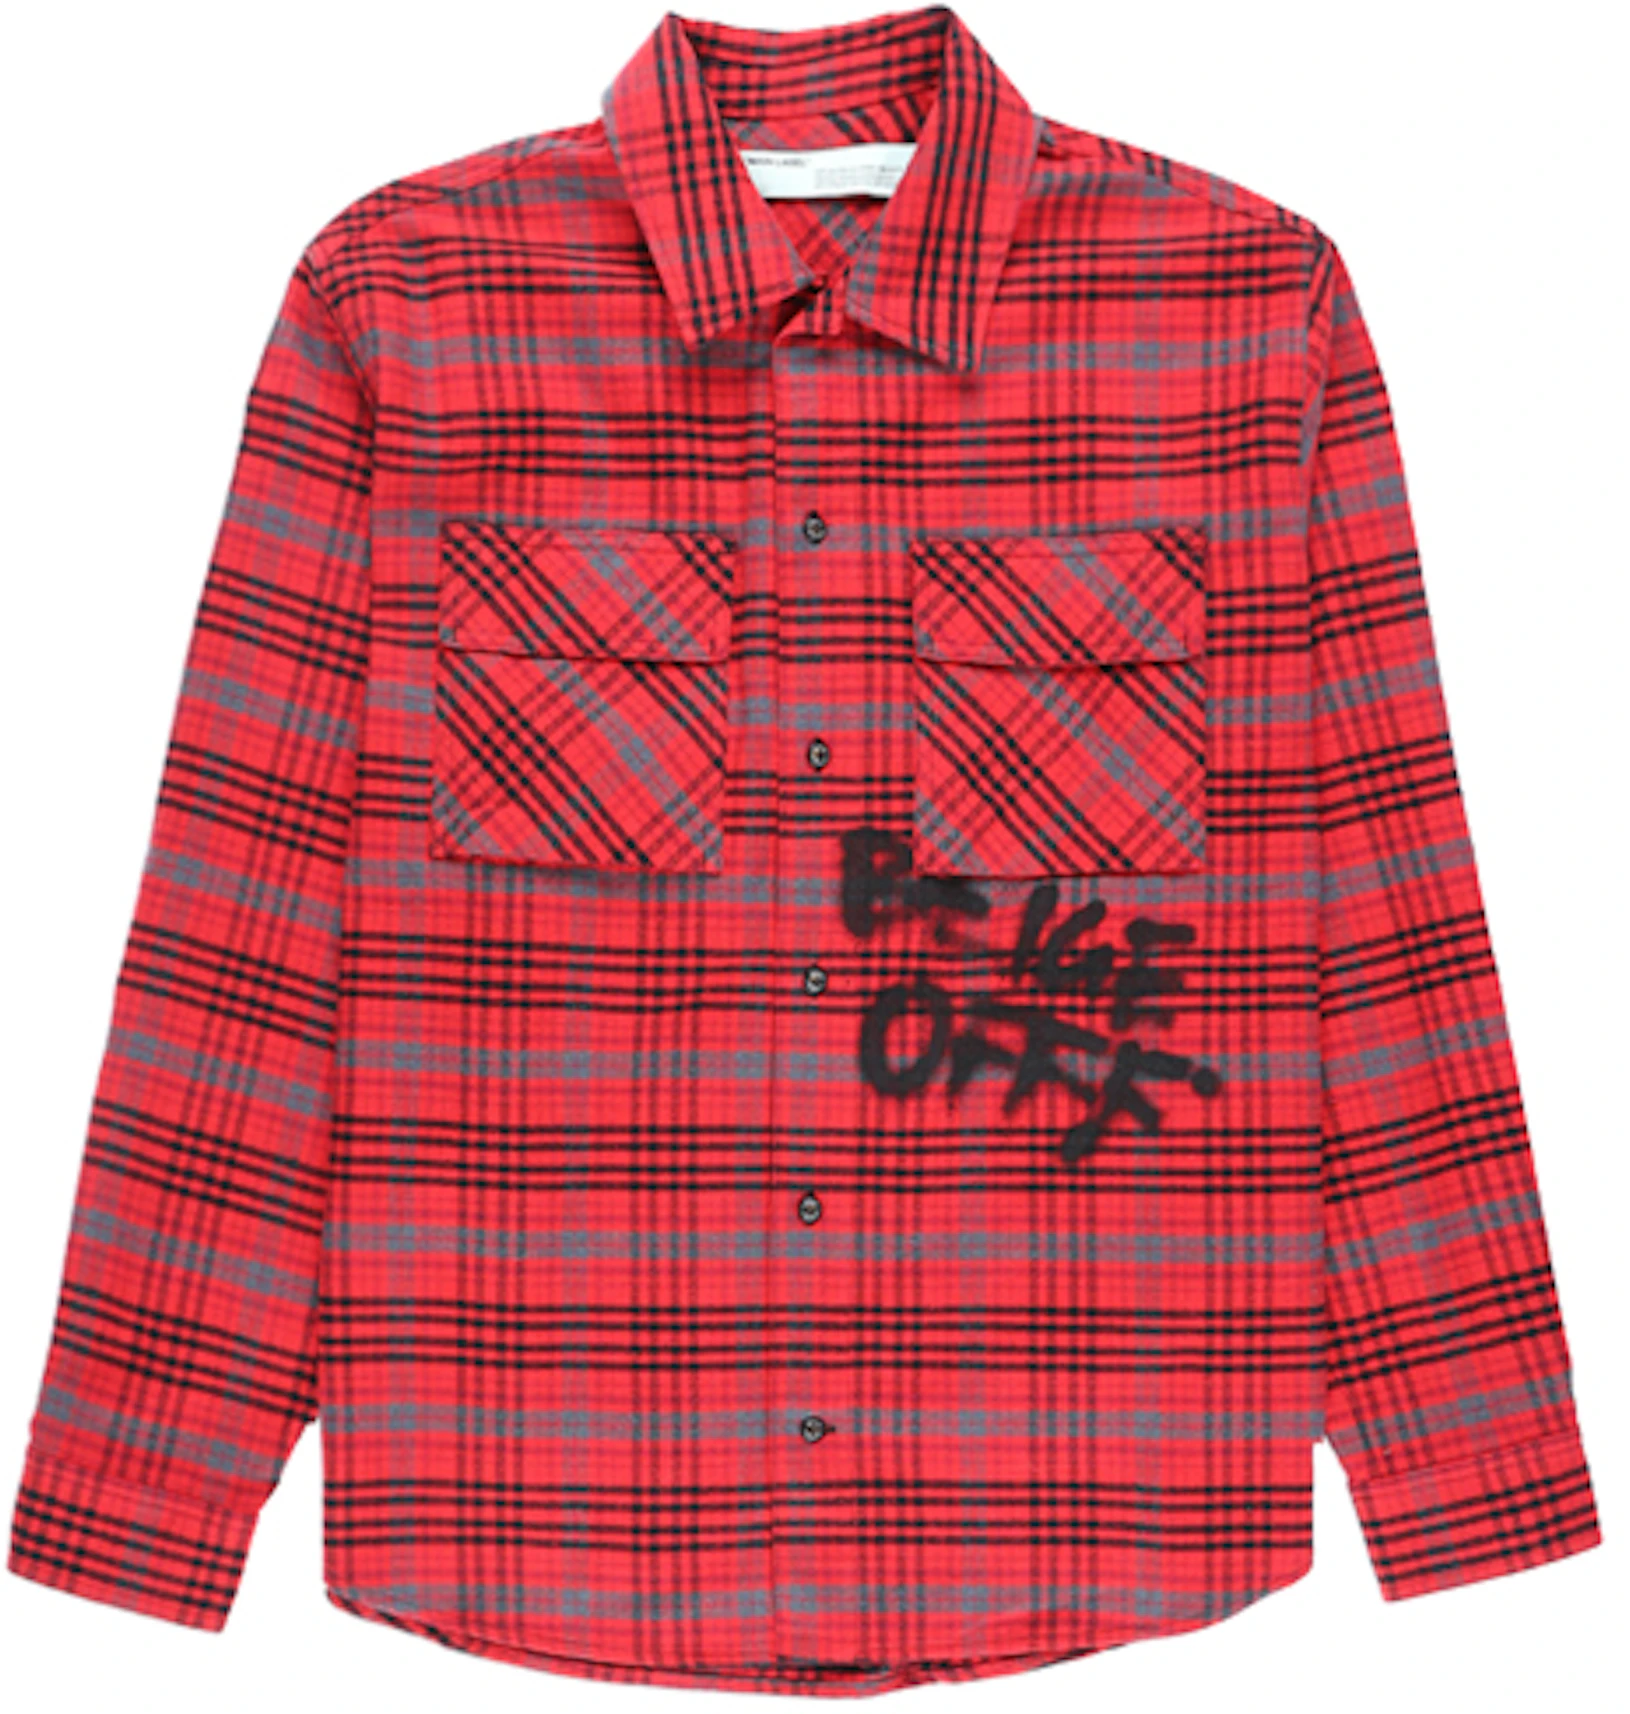 Checked Shirt Off White | vlr.eng.br